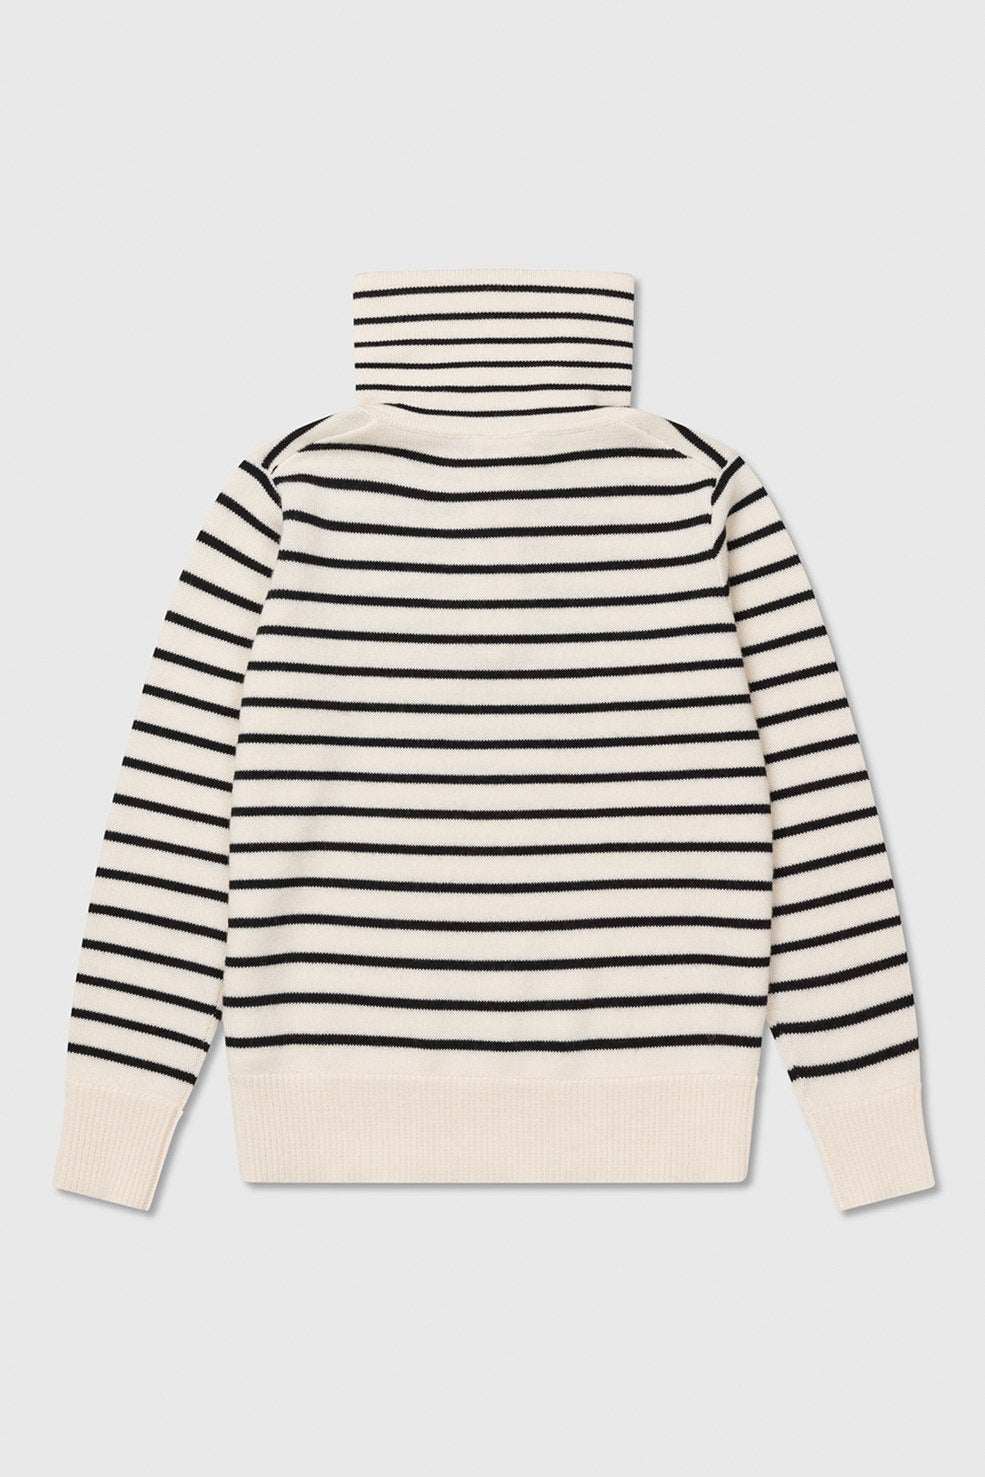 CLEMENTINE JUMPER IN NAVY WHITE STRIPES BY WOOD WOOD